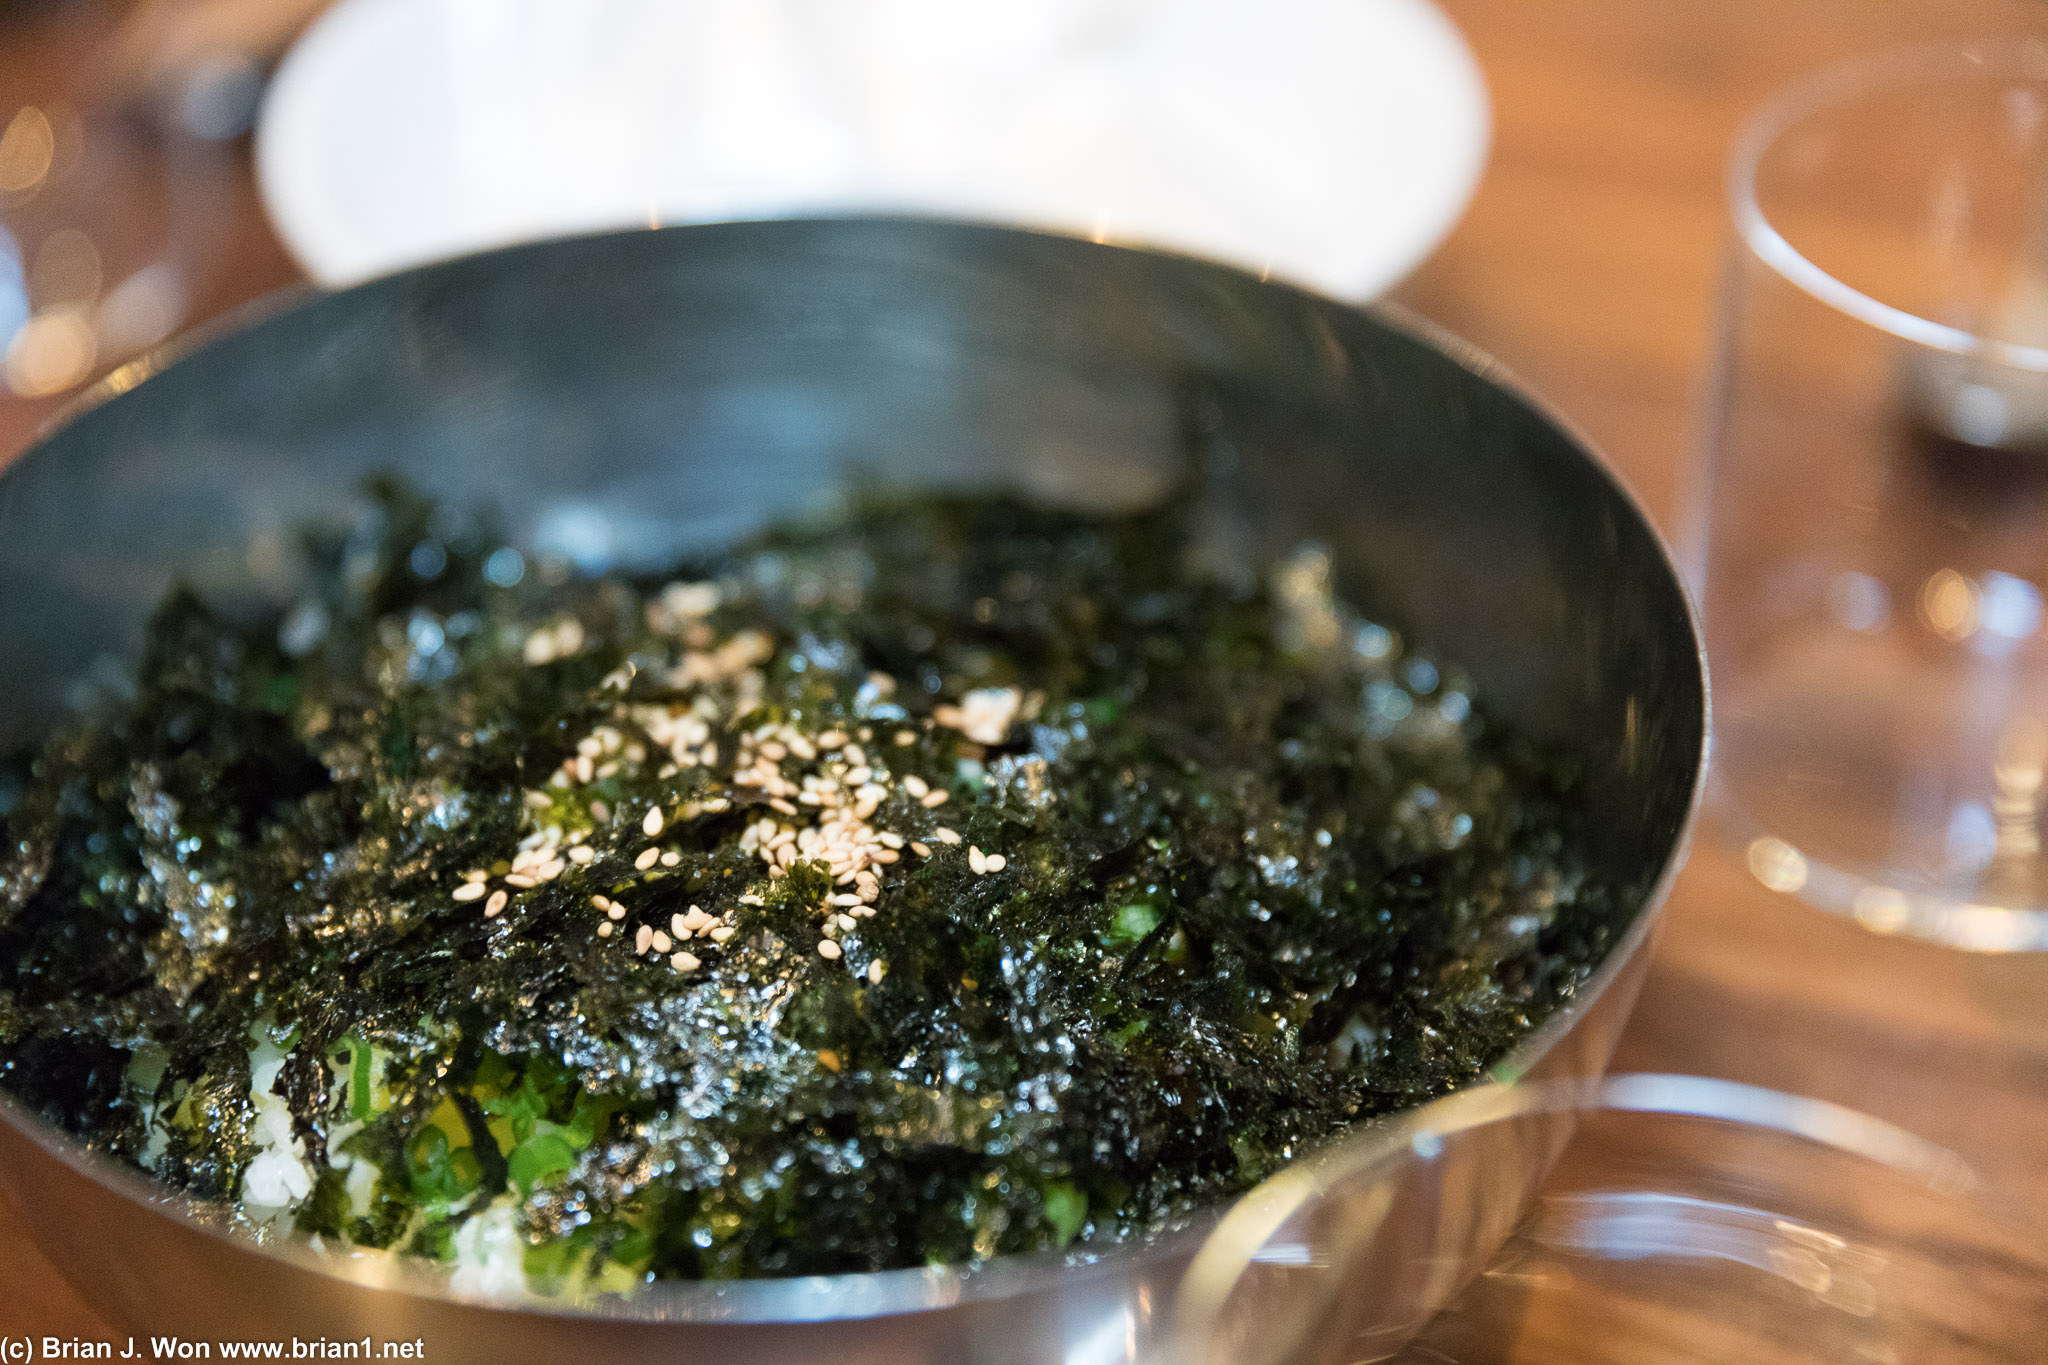 Jumeokbap. Mix it with your hands and form rice/veggie/seaweed balls, then serve.